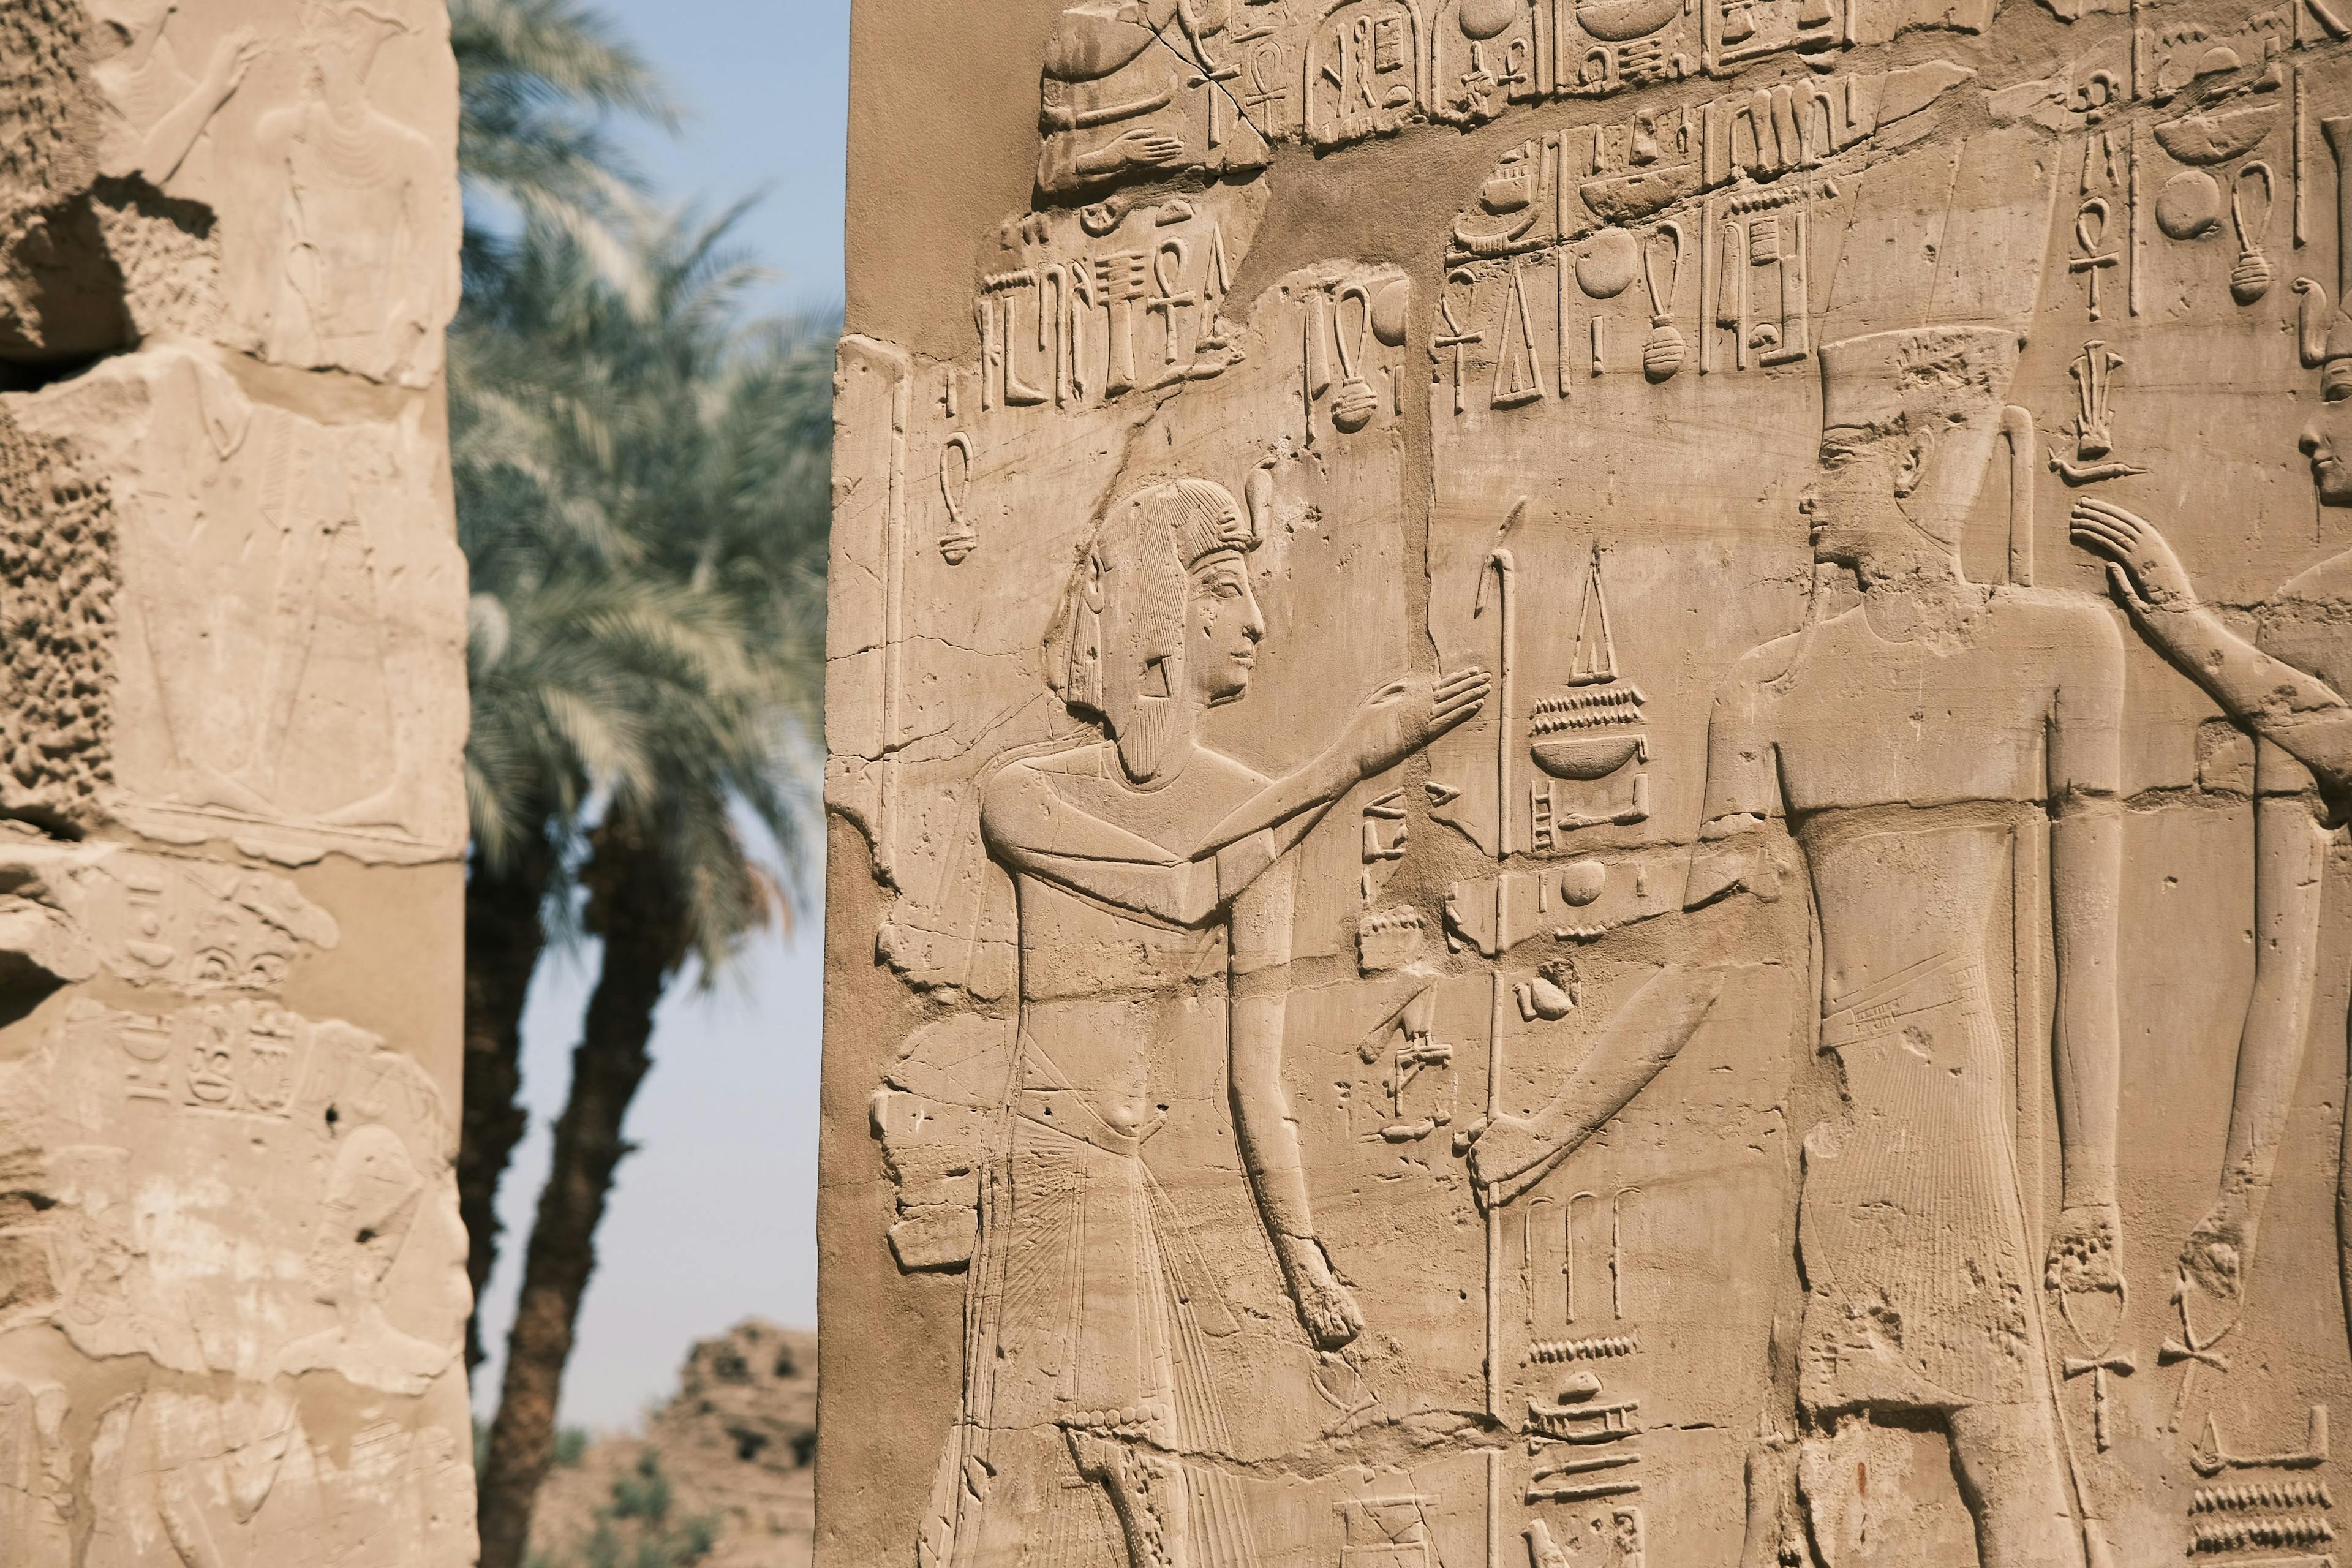 Carvings on the wall of Karnak temple in Egypt.